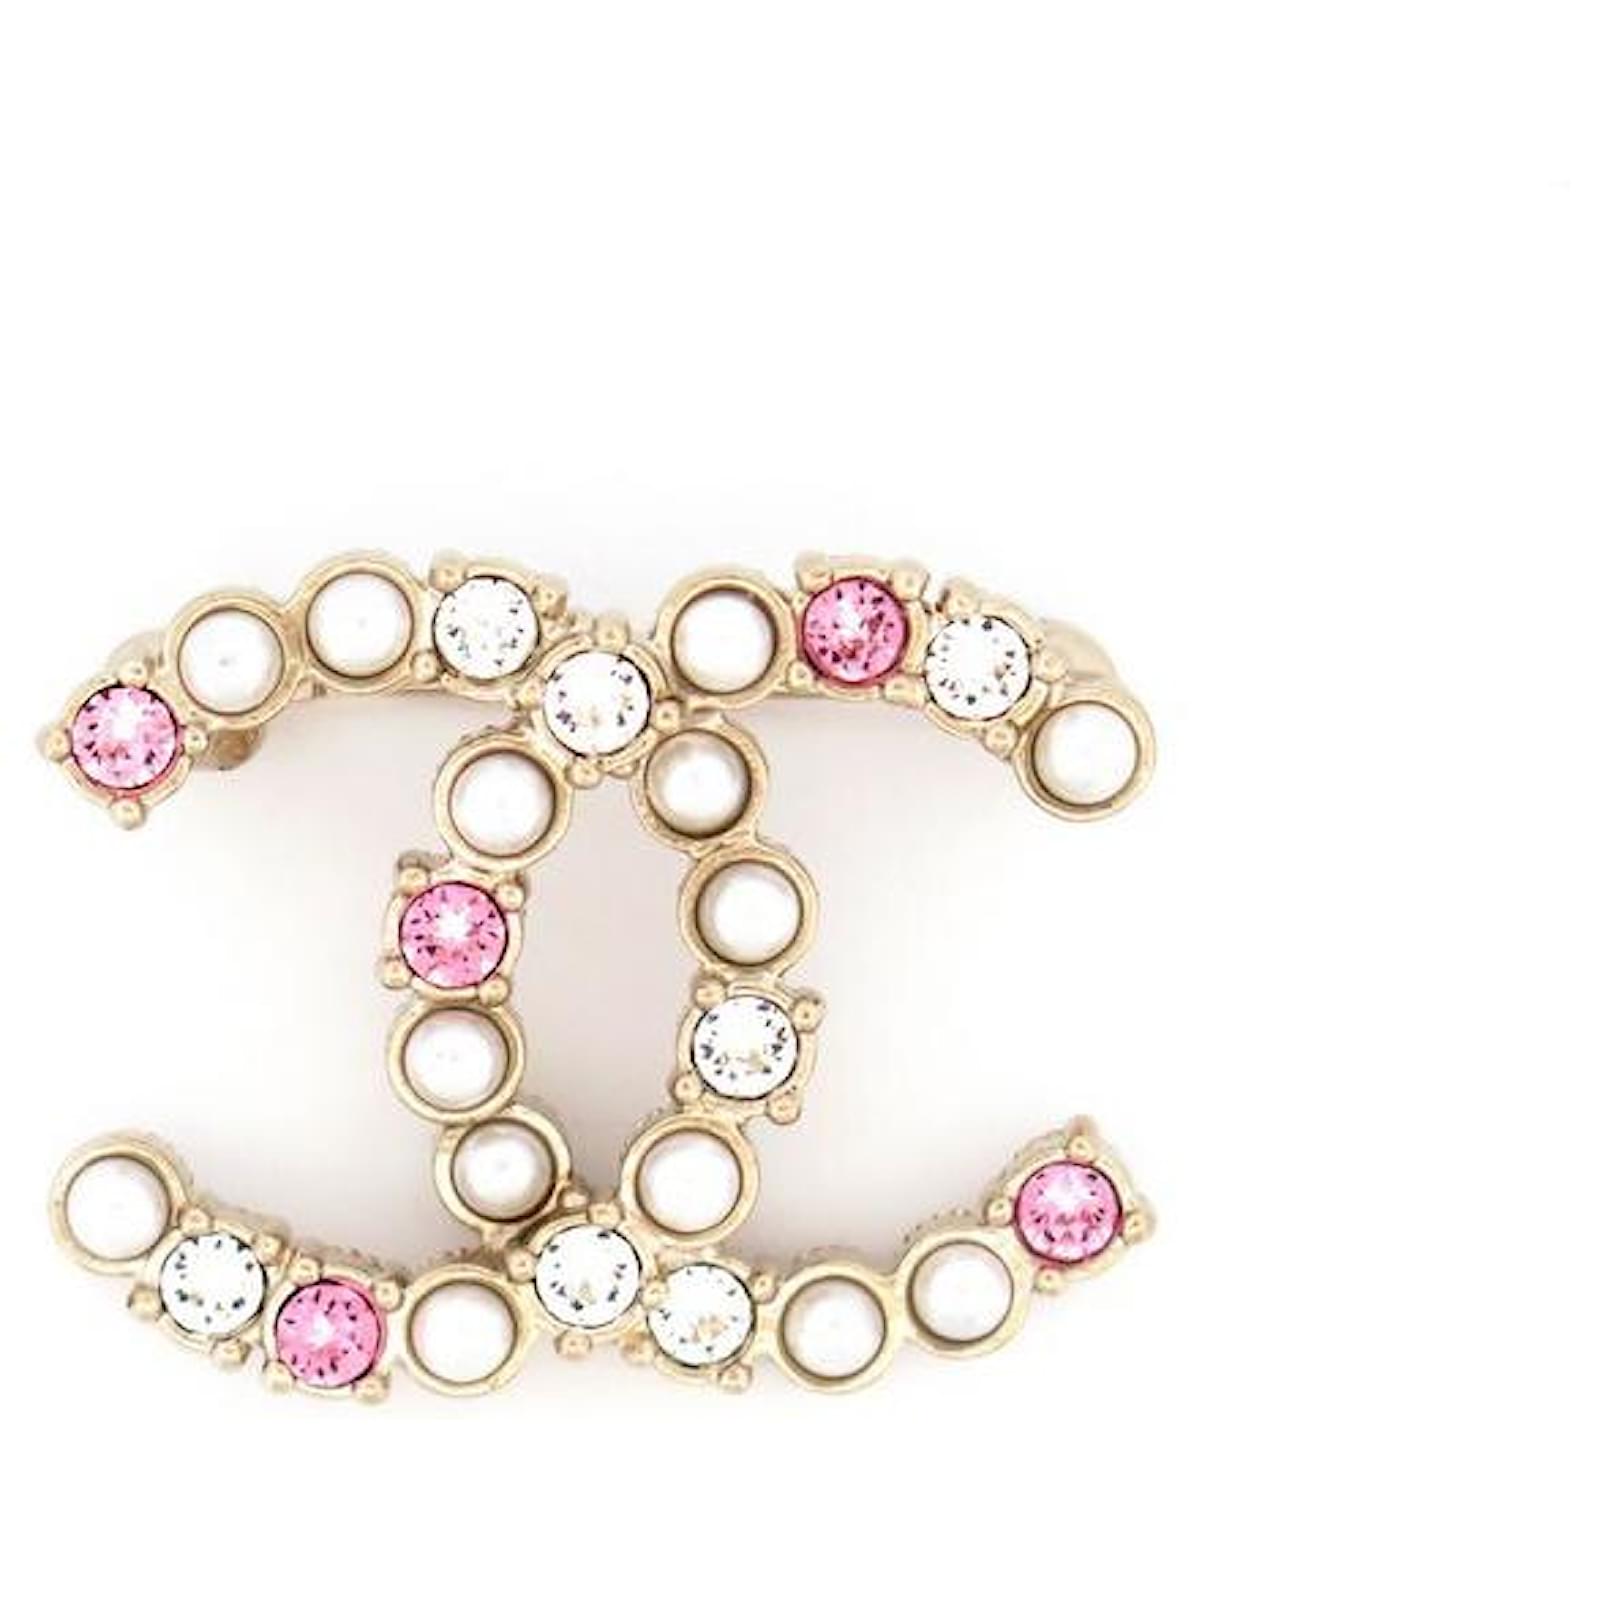 Chanel Emoticon Heart Brooch Metal with Crystals, Faux Pearls, and